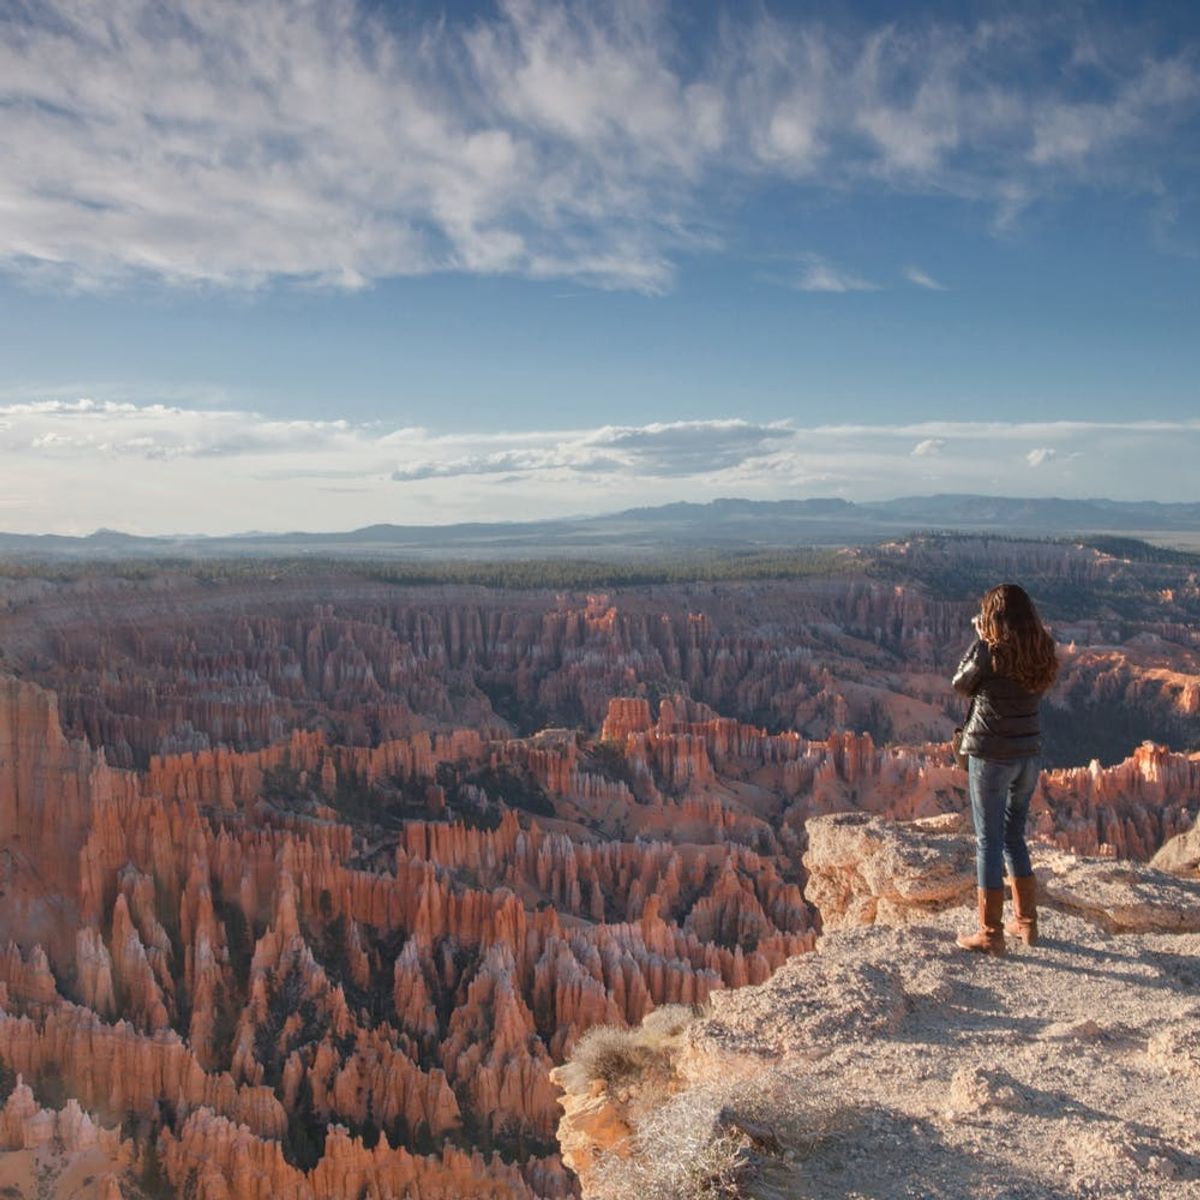 5 Reasons to Make Your Next Trip a National Park Visit